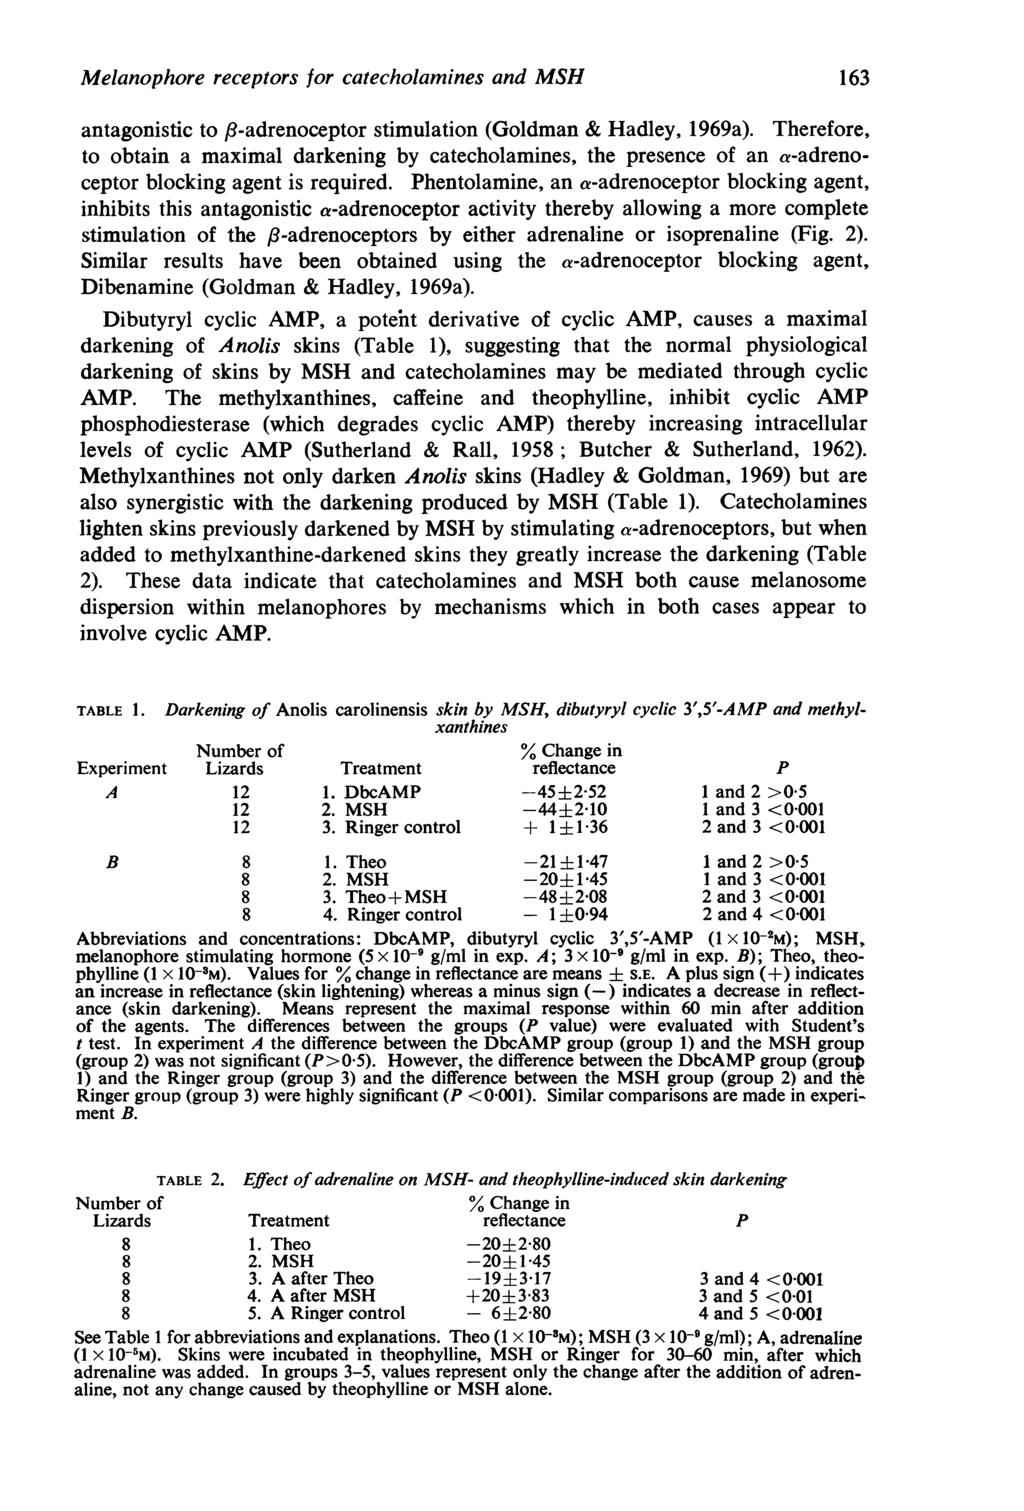 Melanophore receptors for catecholamines and MSH antagonistic to f8-adrenoceptor stimulation (Goldman & Hadley, 1969a).